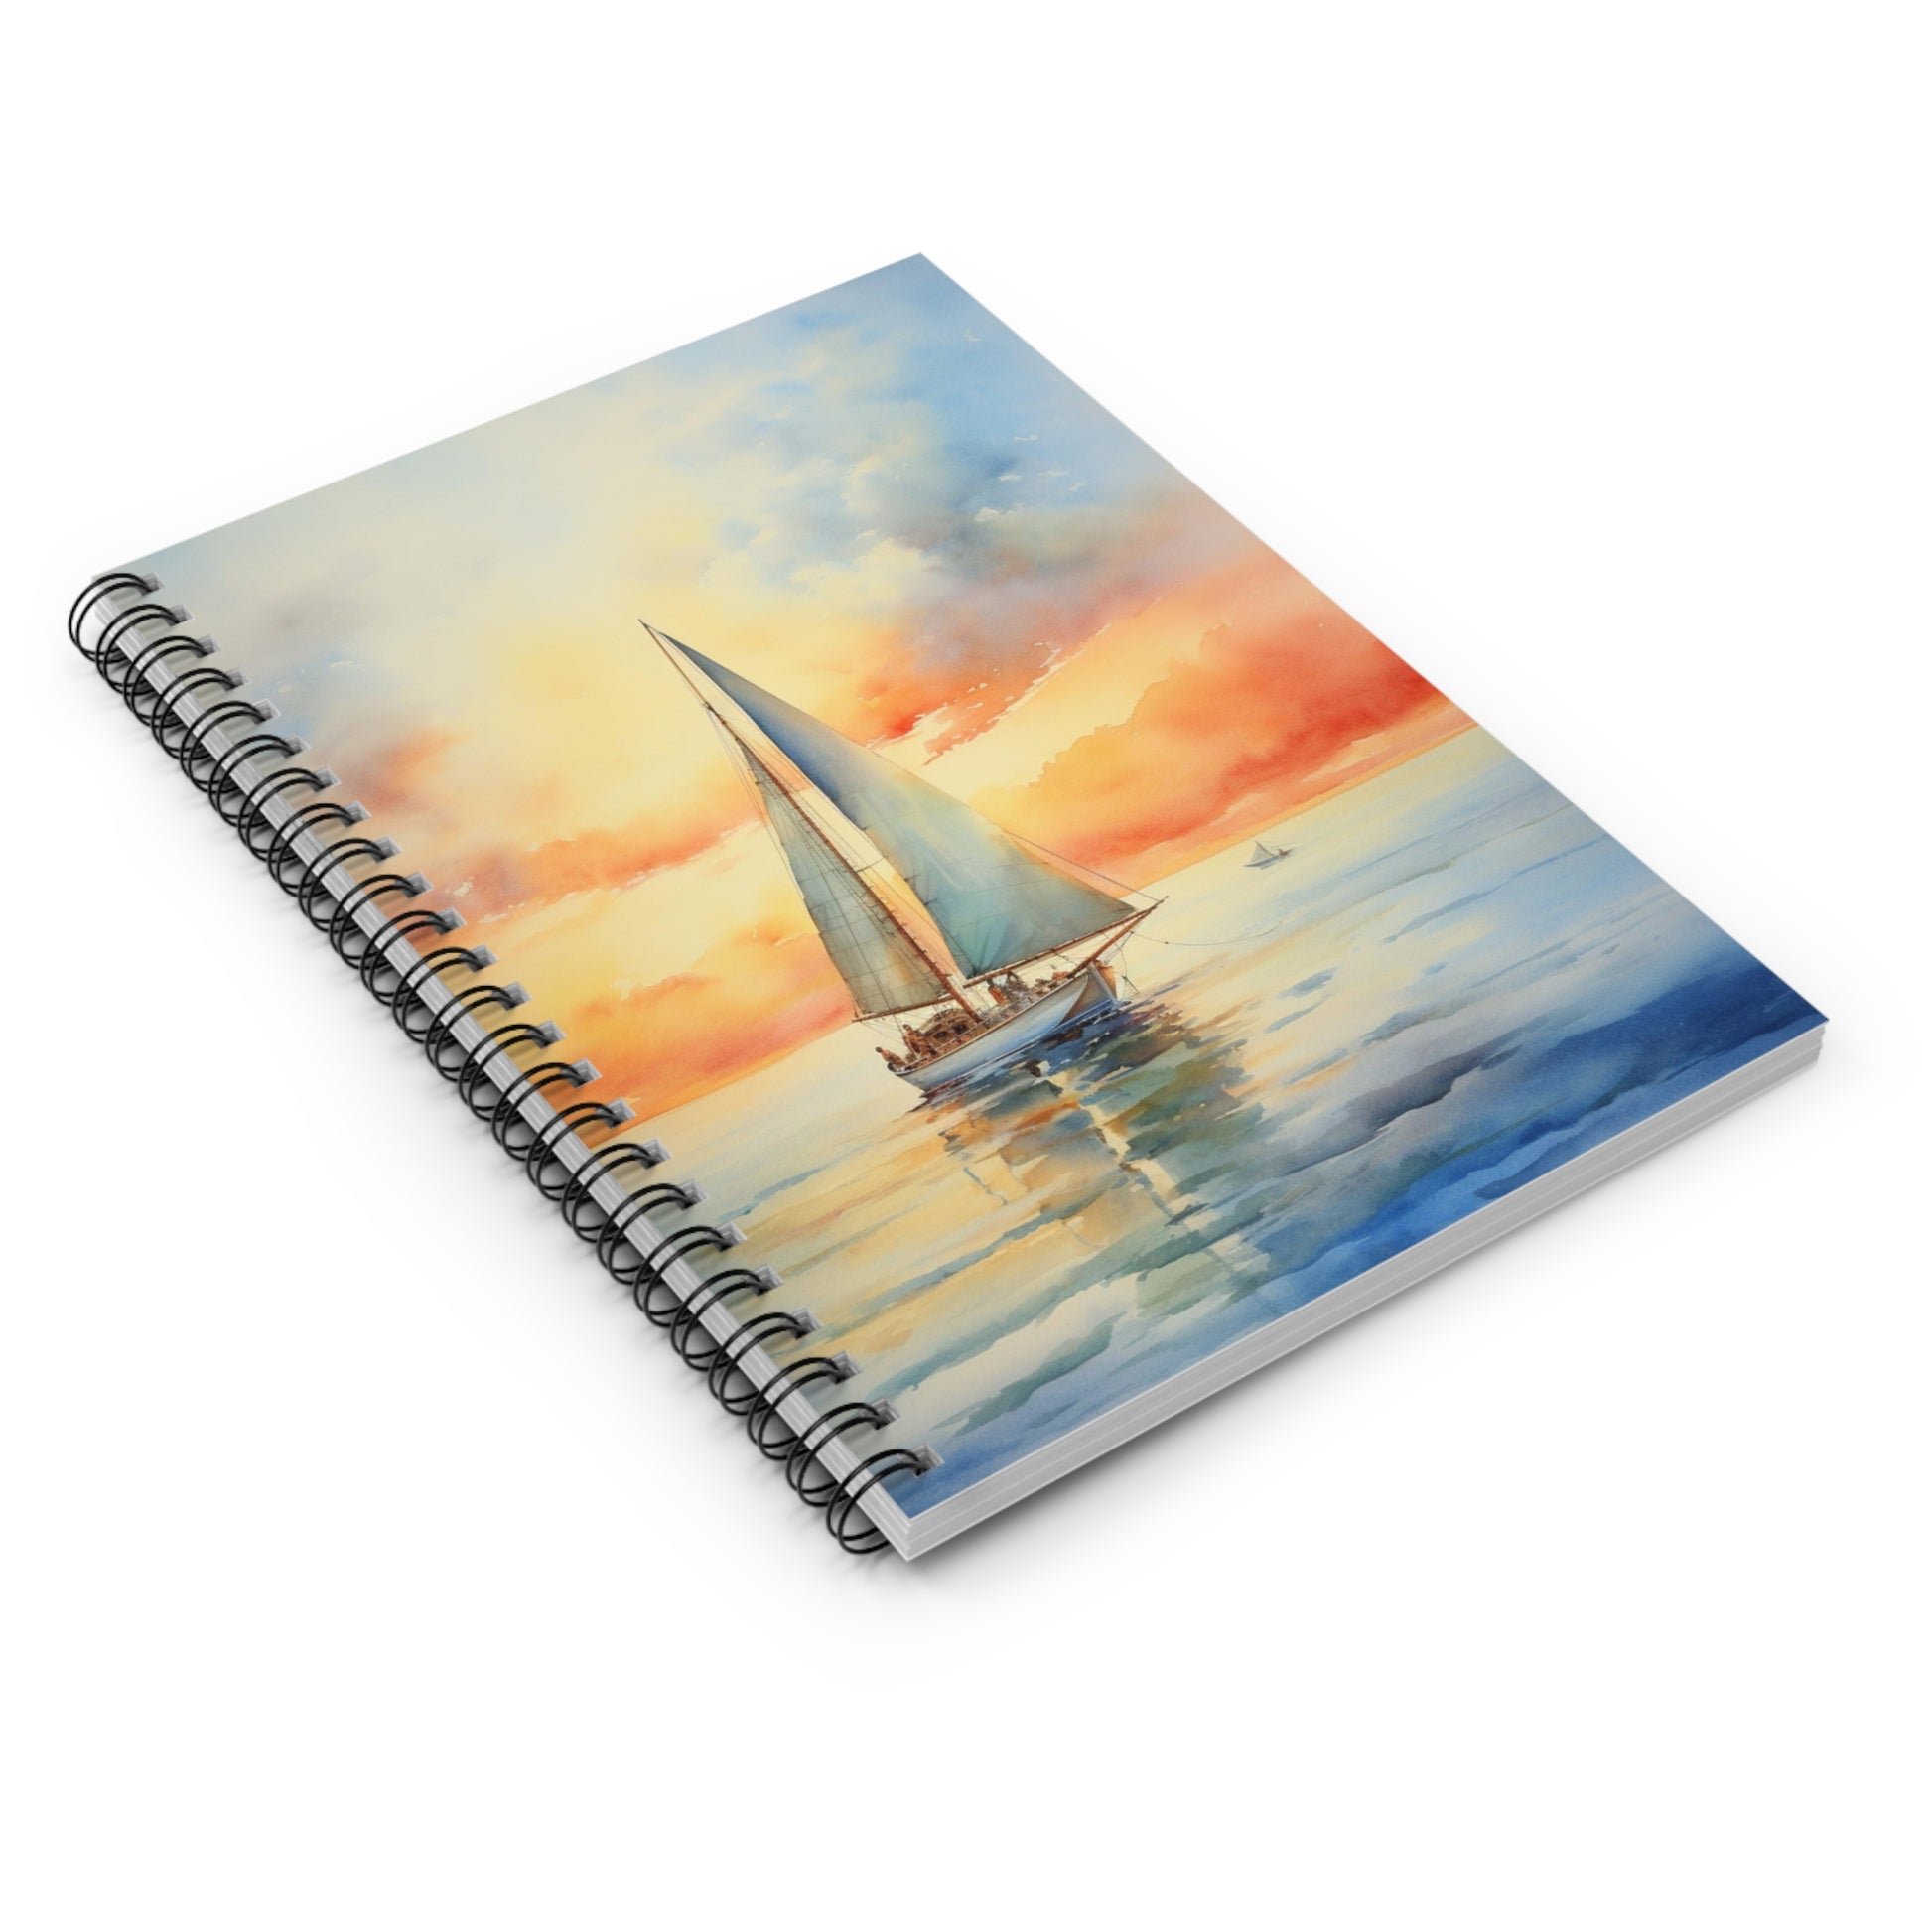 Sunset Sailing Spiral Notebook, Sail Boat Ocean Sea Travel Design Small Journal Notepad Ruled Line Book Paper Pad Work Aesthetic Gift Starcove Fashion